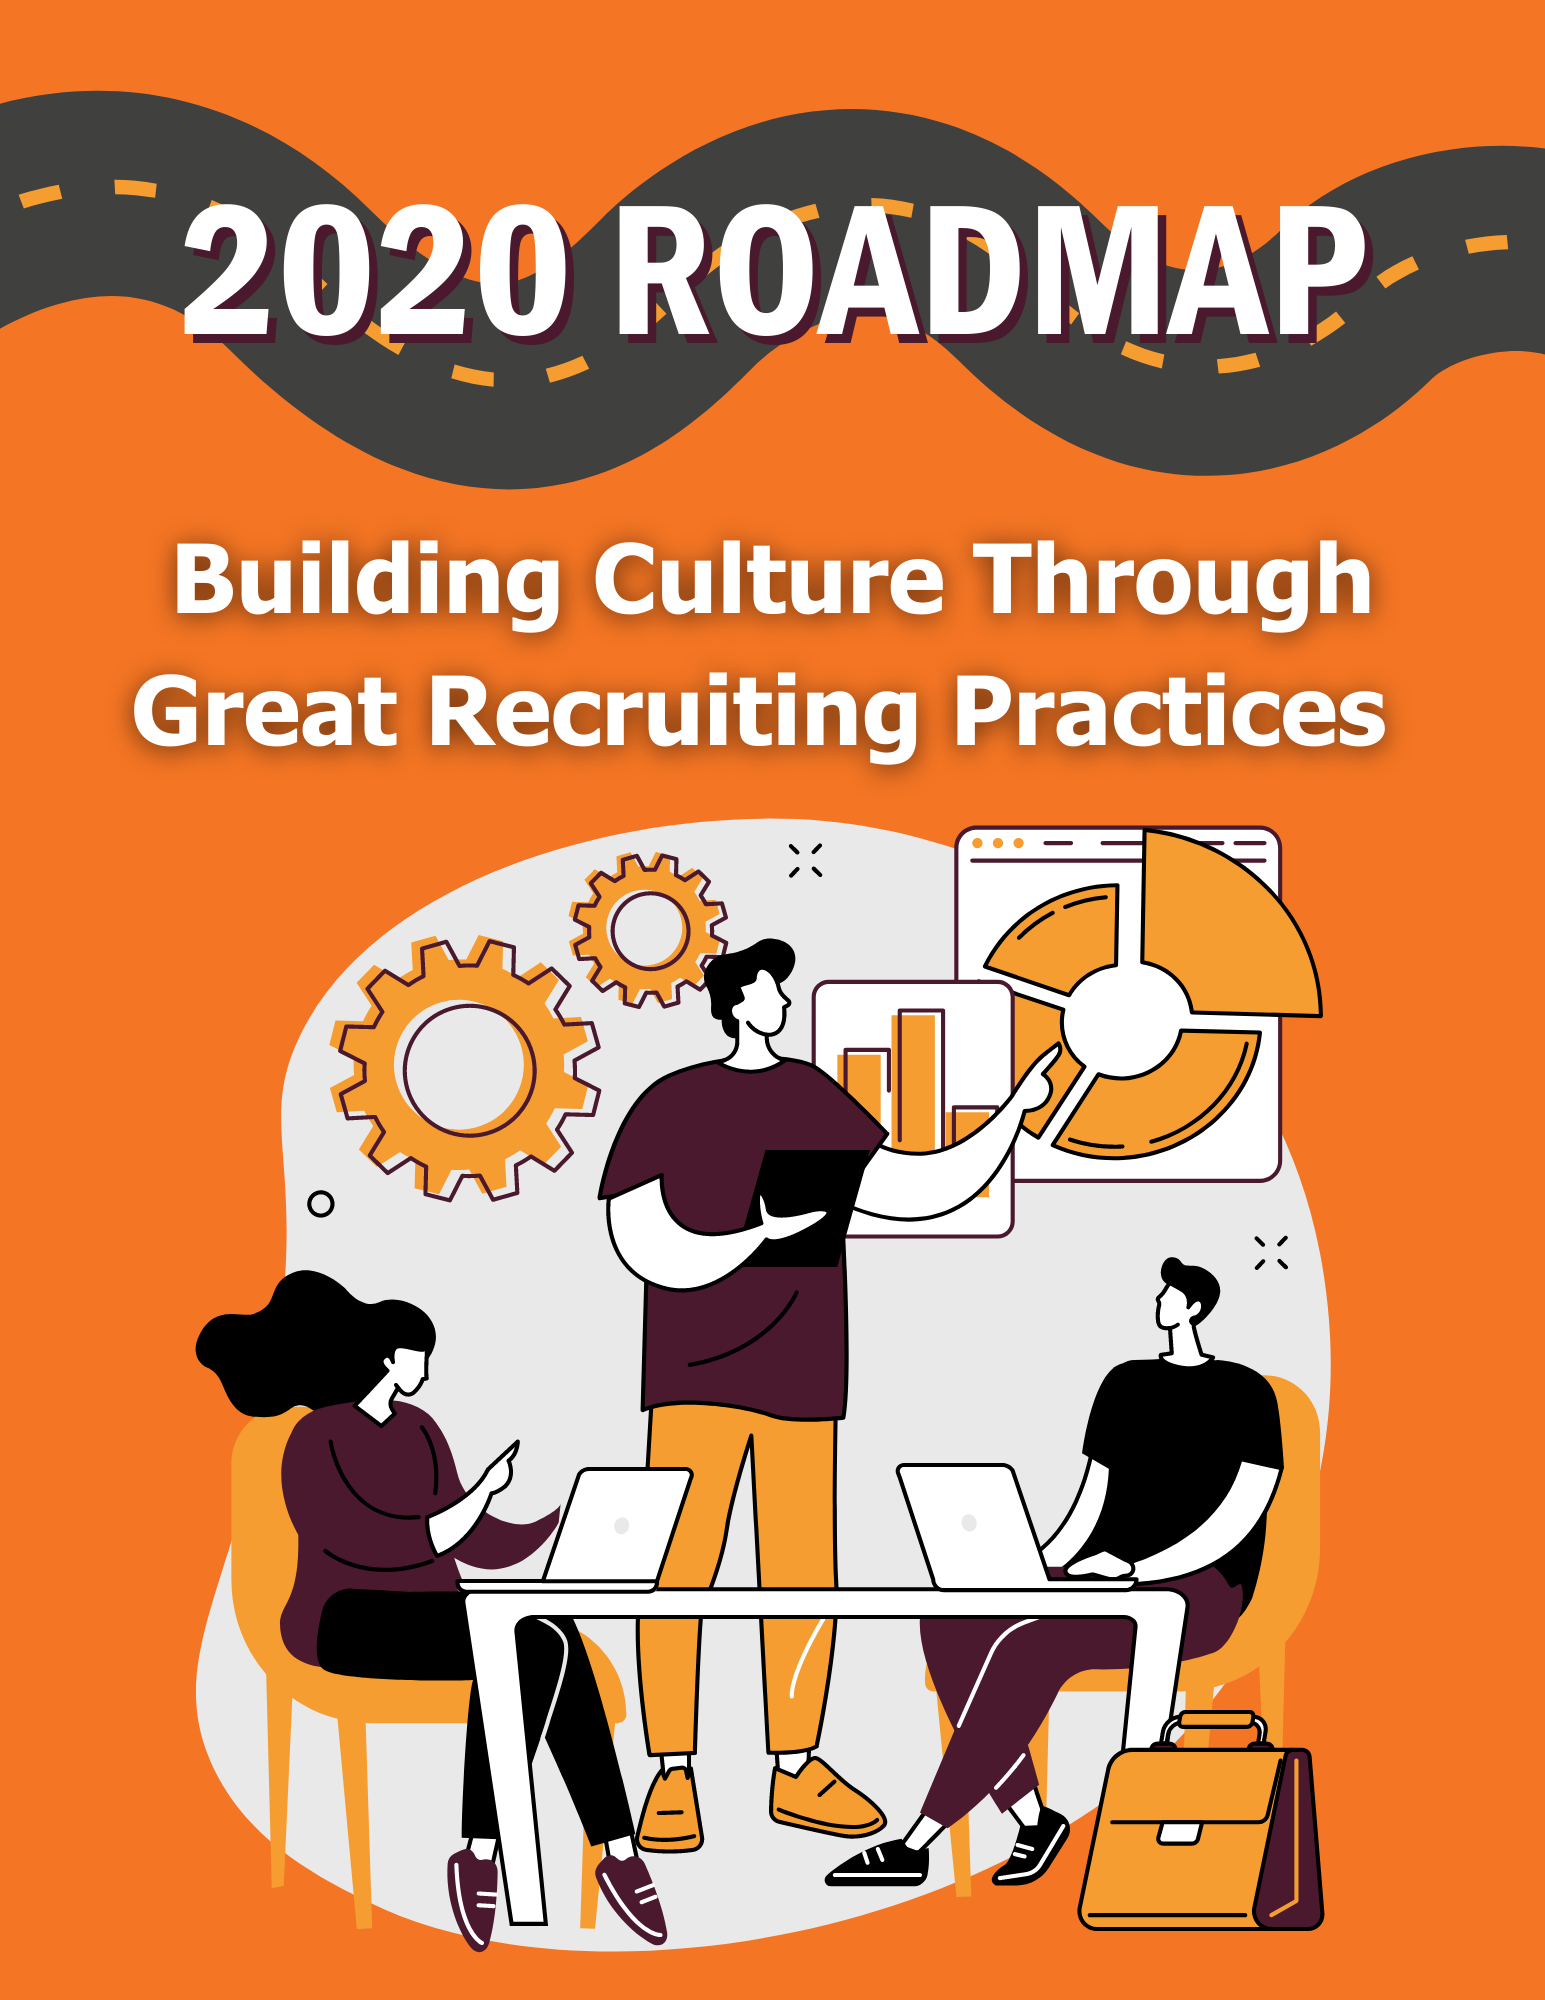 Building Culture Through Great Recruiting Practices